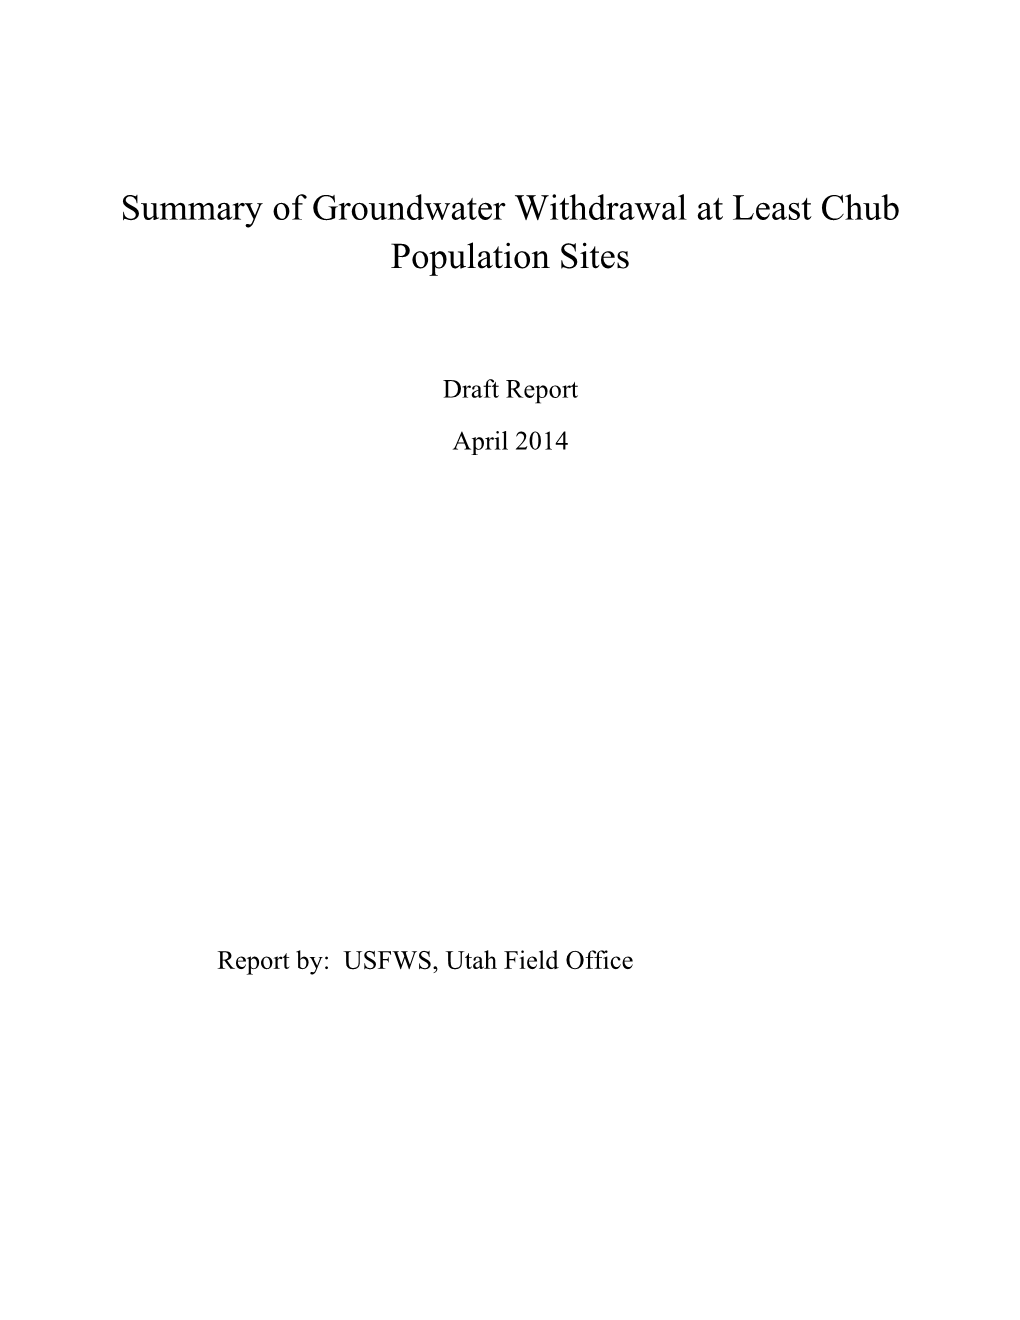 Summary of Groundwater Withdrawal at Least Chub Population Sites